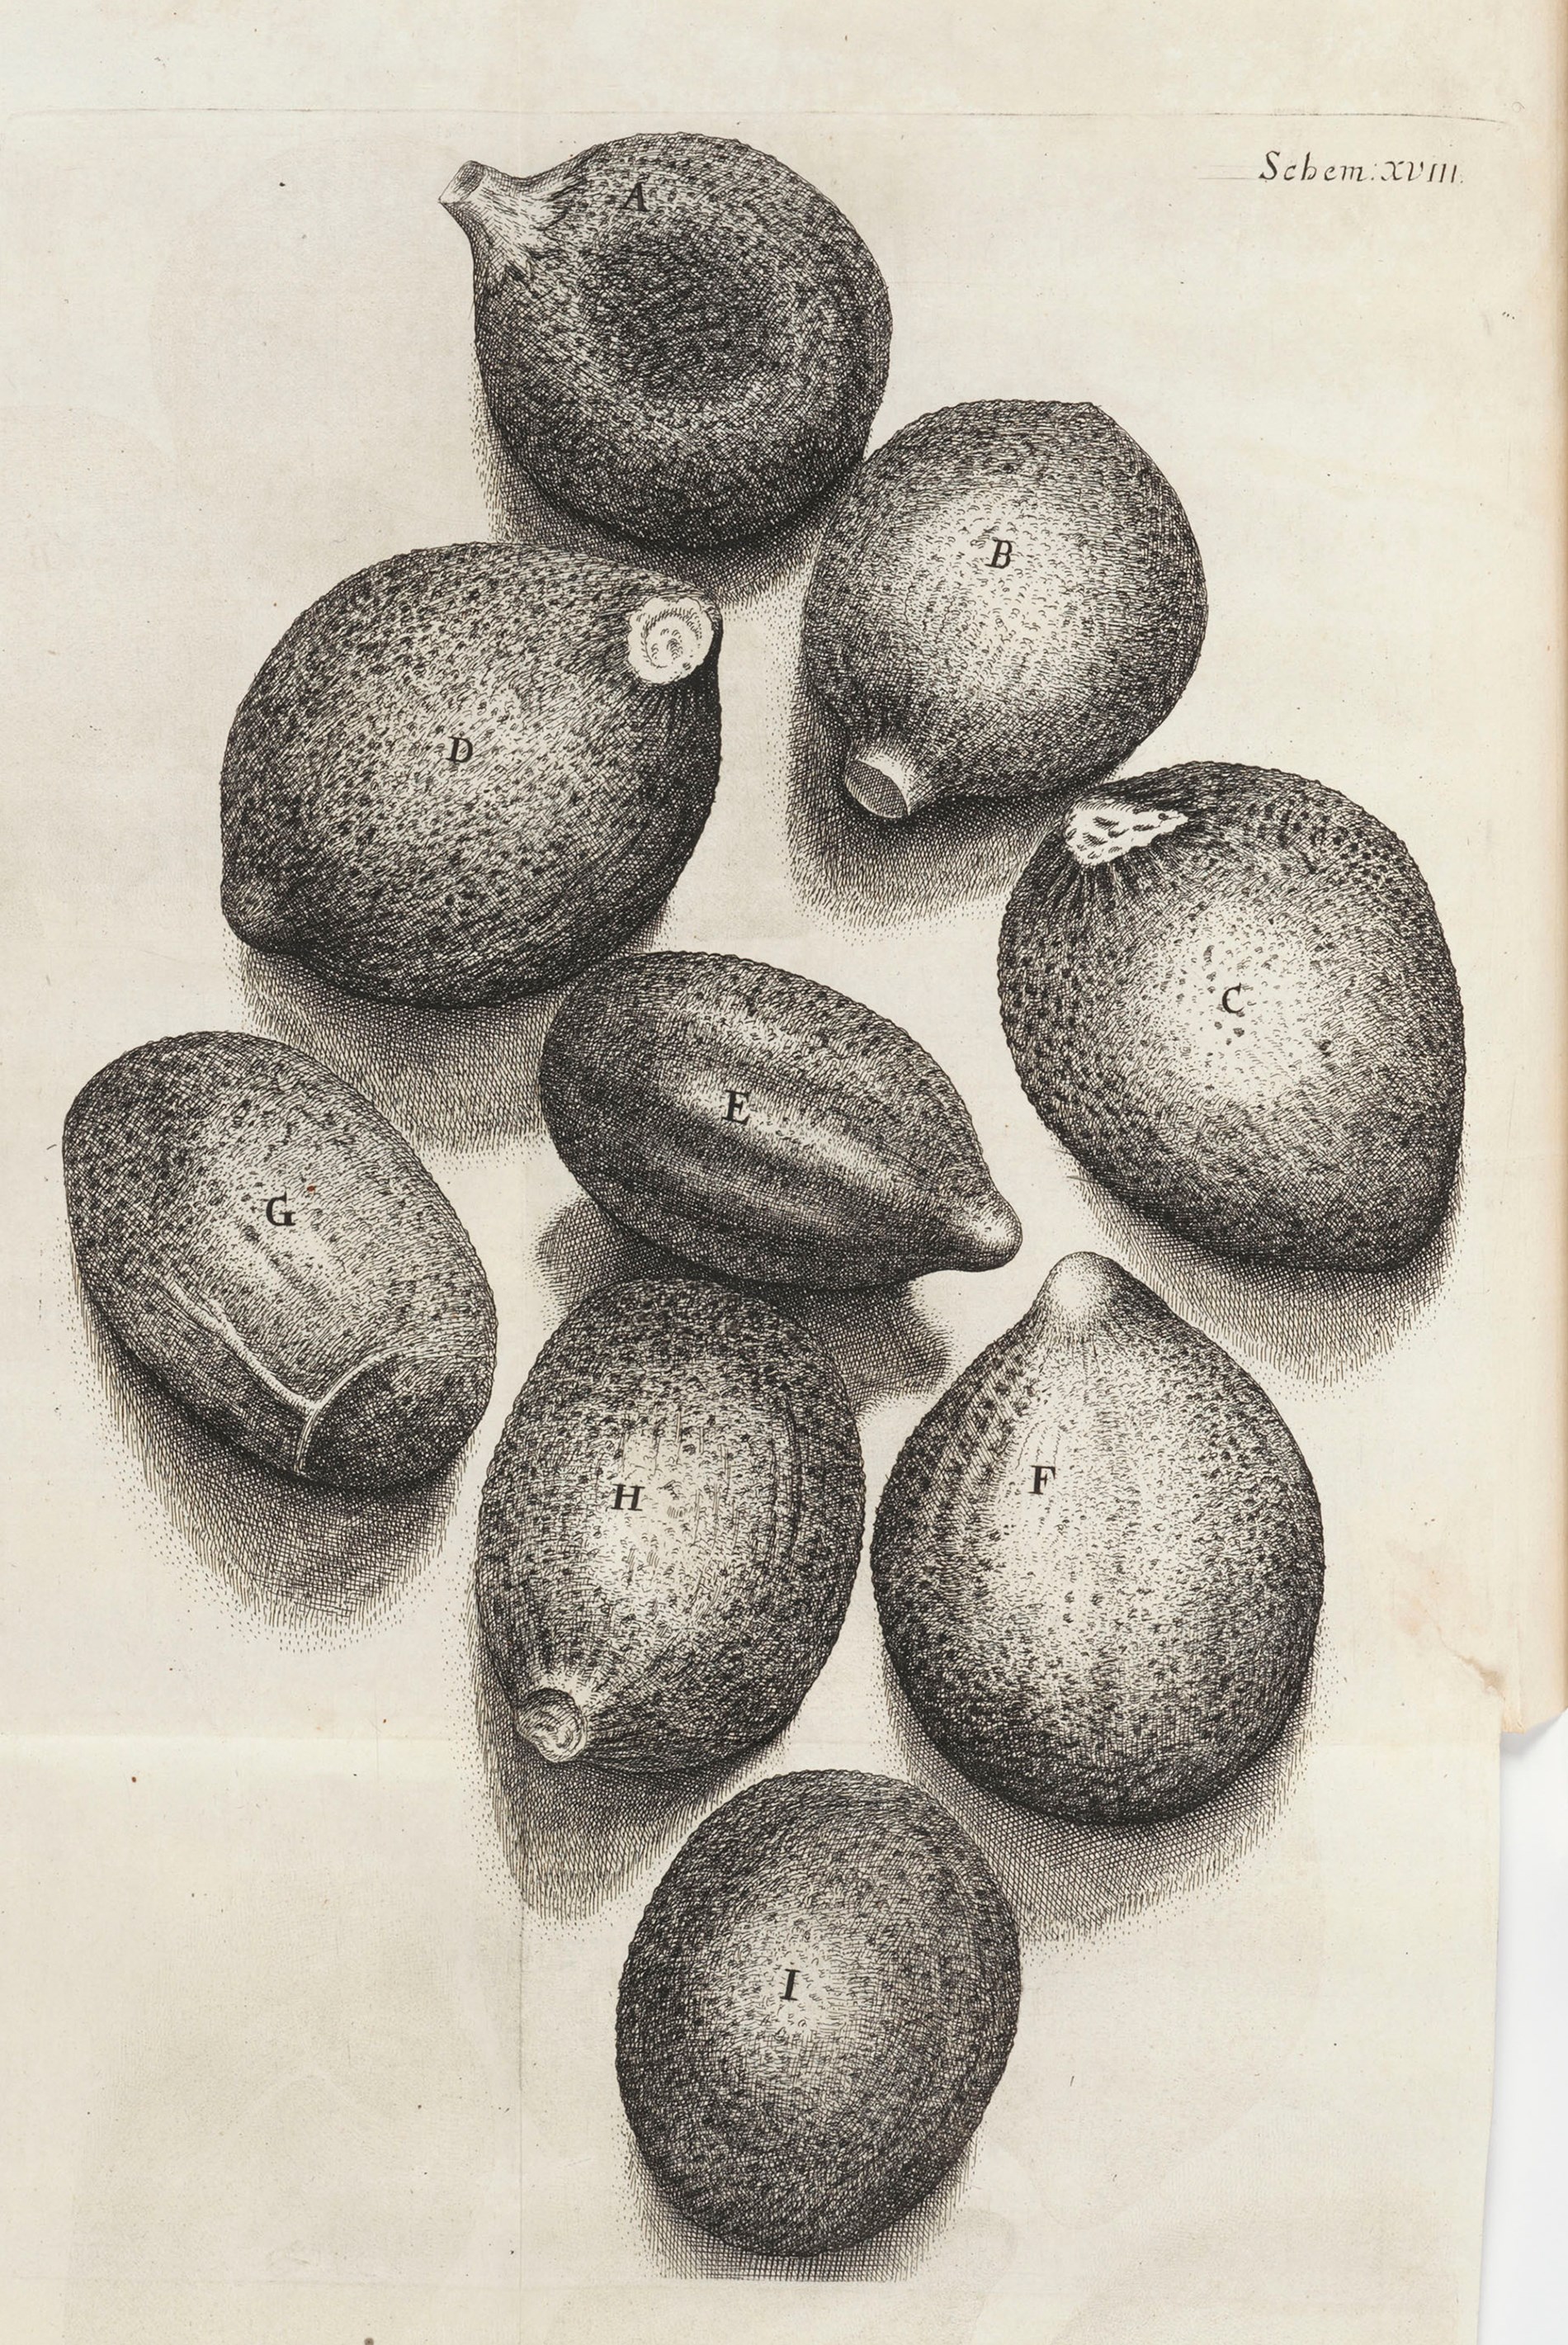 Plate XVIII 'Of the Seeds of Tyme' from Micrographia by Robert Hooke (1665)